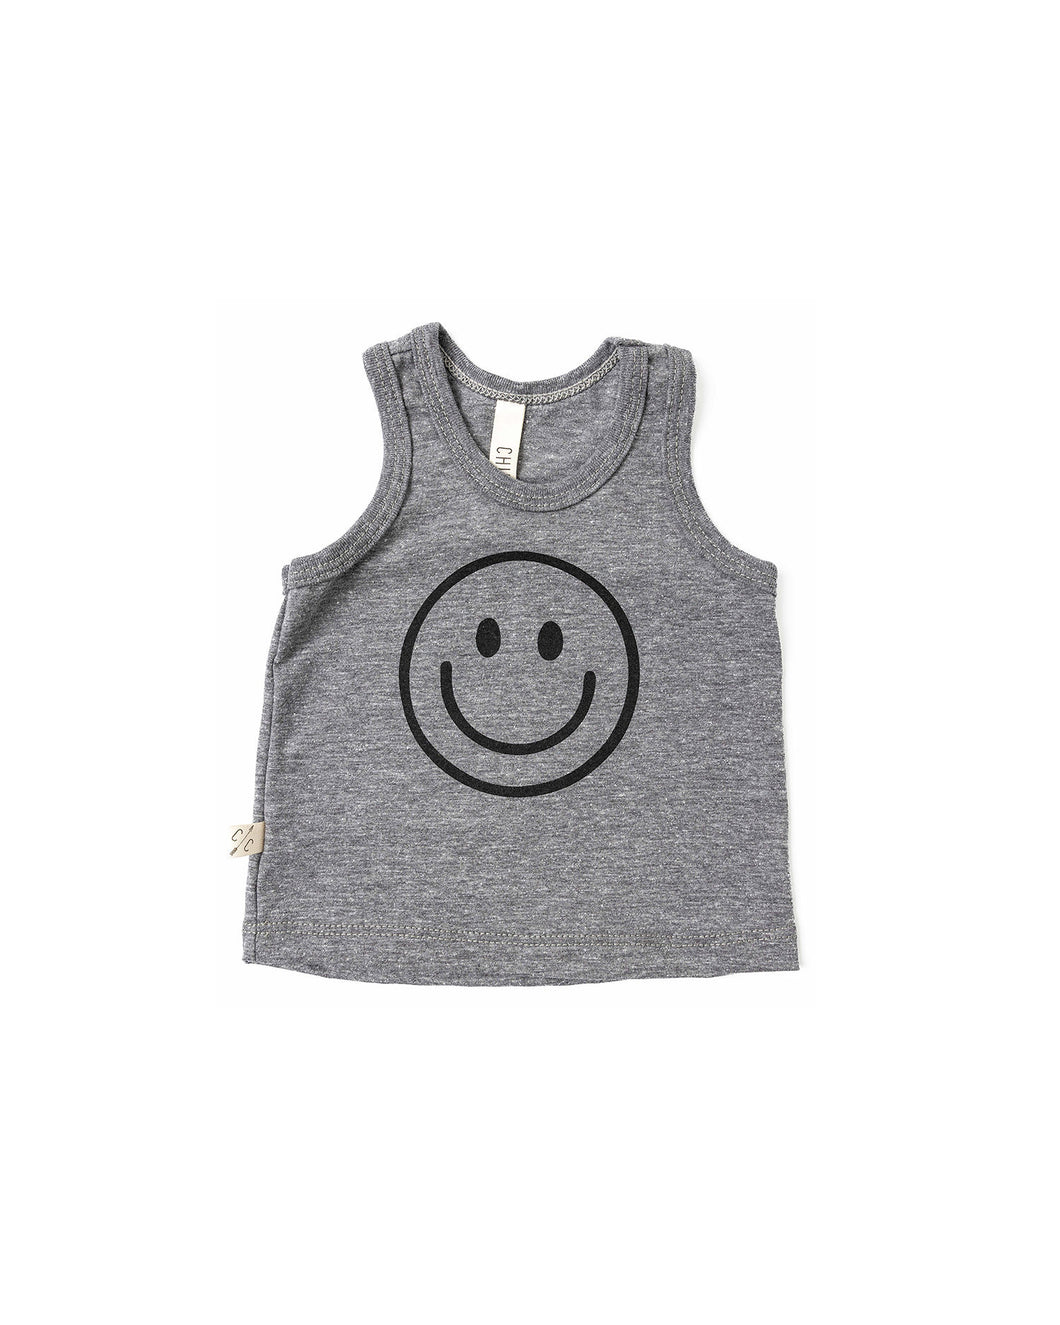 tank top - smile on athletic gray